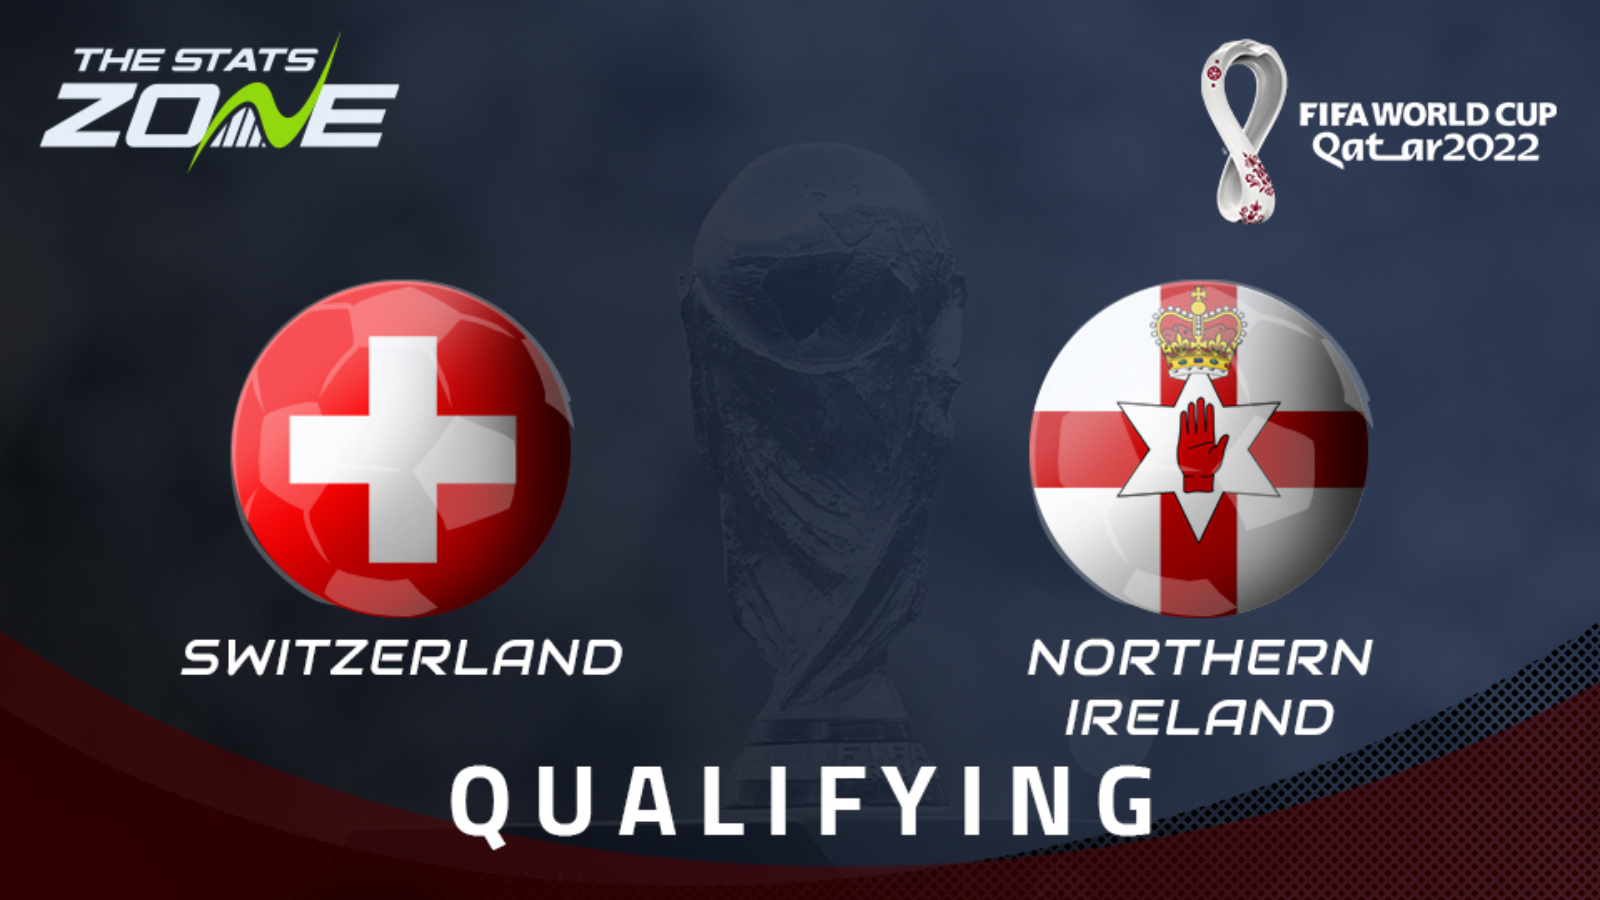 FIFA World Cup 2022 - European Qualifiers - Switzerland and Northern Ireland Preview and Predictions